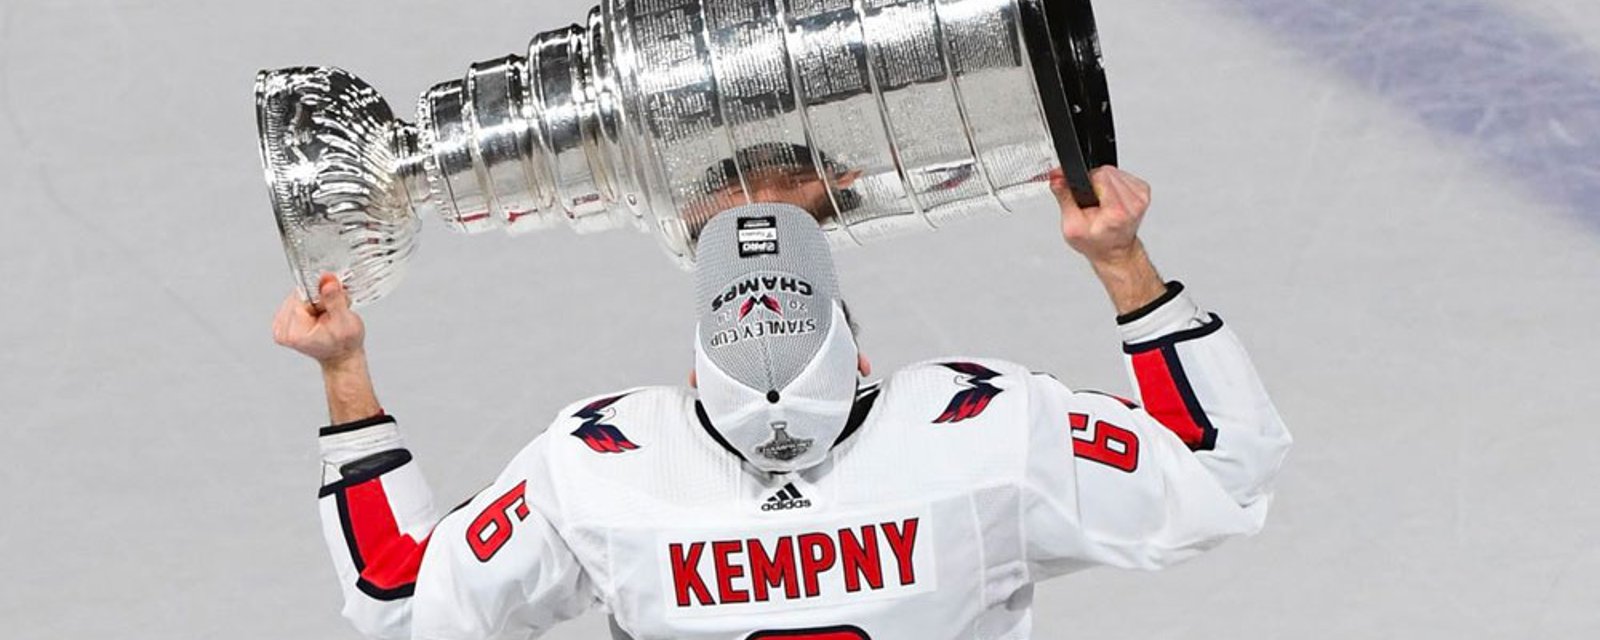 Michal Kempny's NHL career appears to be over